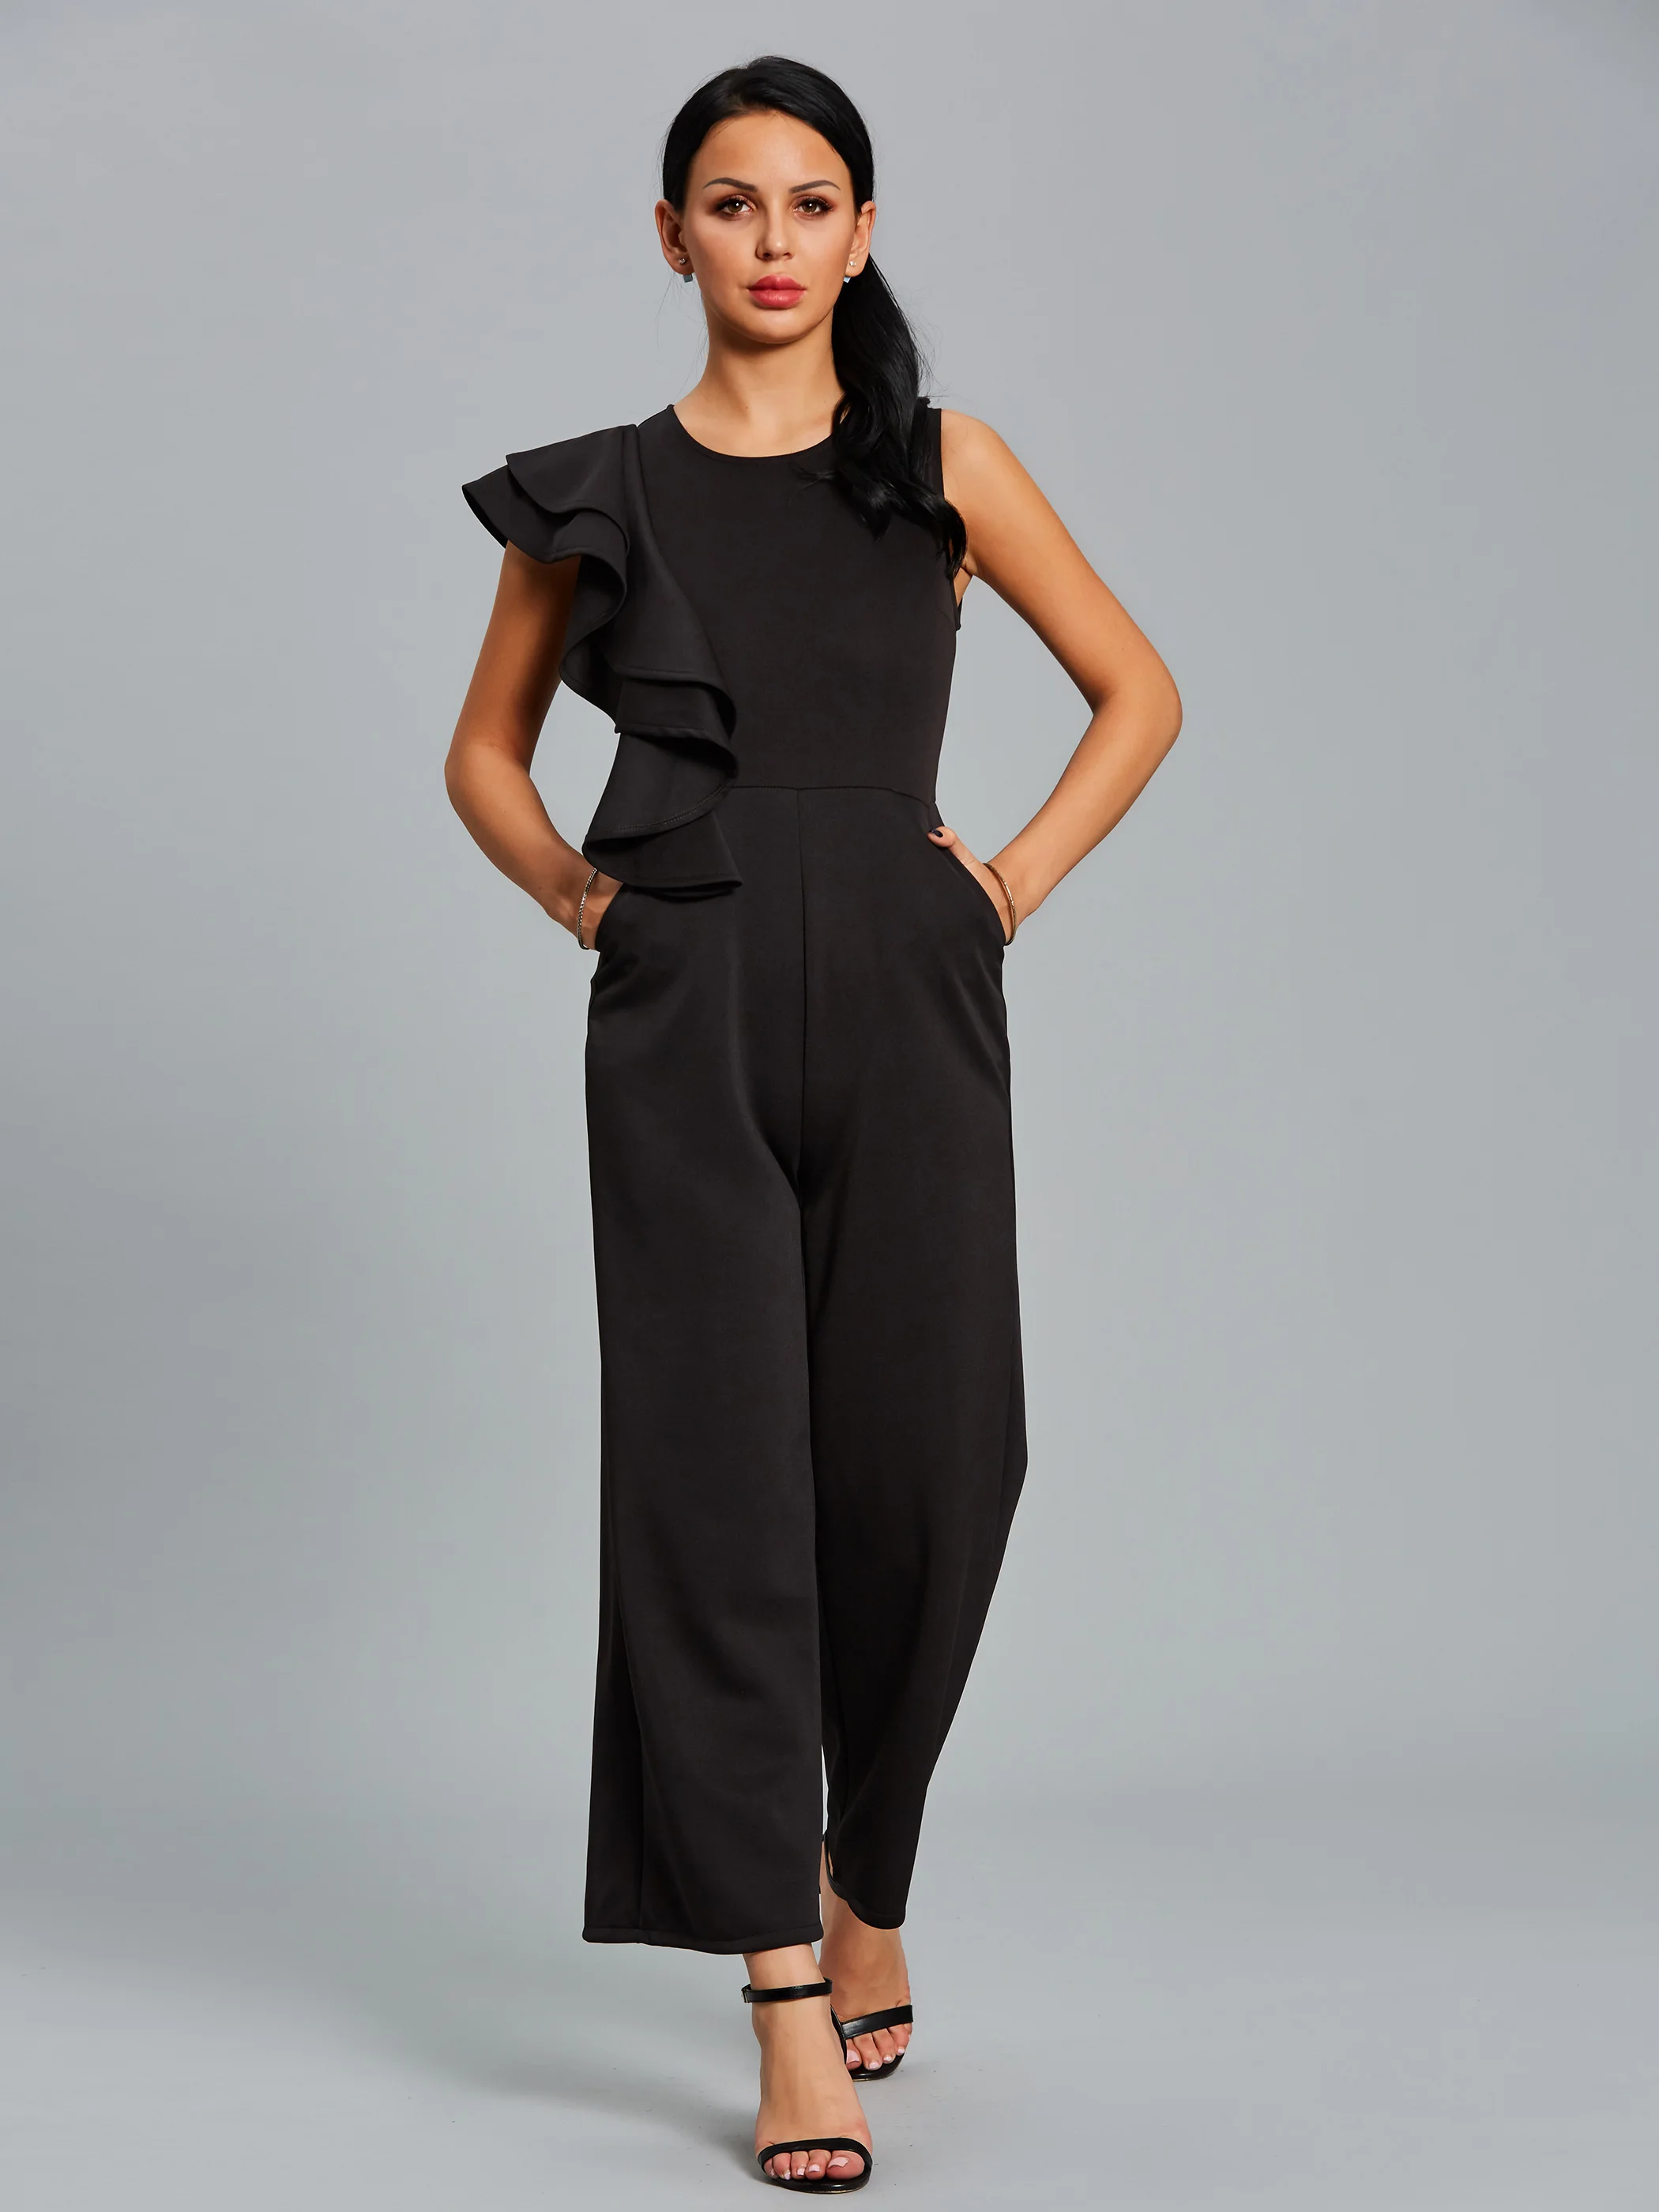 

Slim Asymmetric Falbala Patchwork Black Women Jumpsuits New Chic Summer One Piece Rompers Playsuits Office Lady Wide Legs Pants